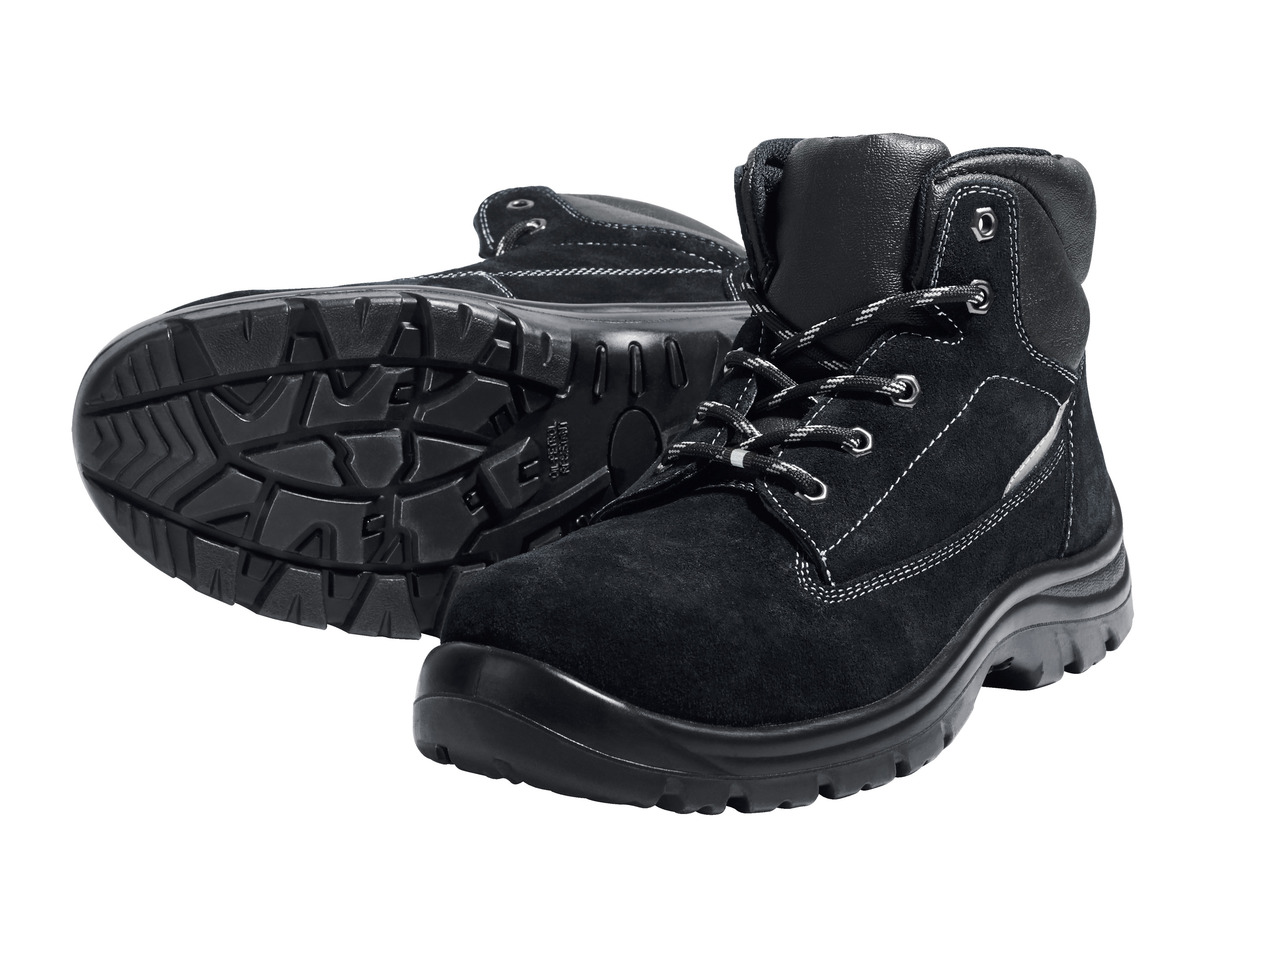 Men's Leather Safety Boots